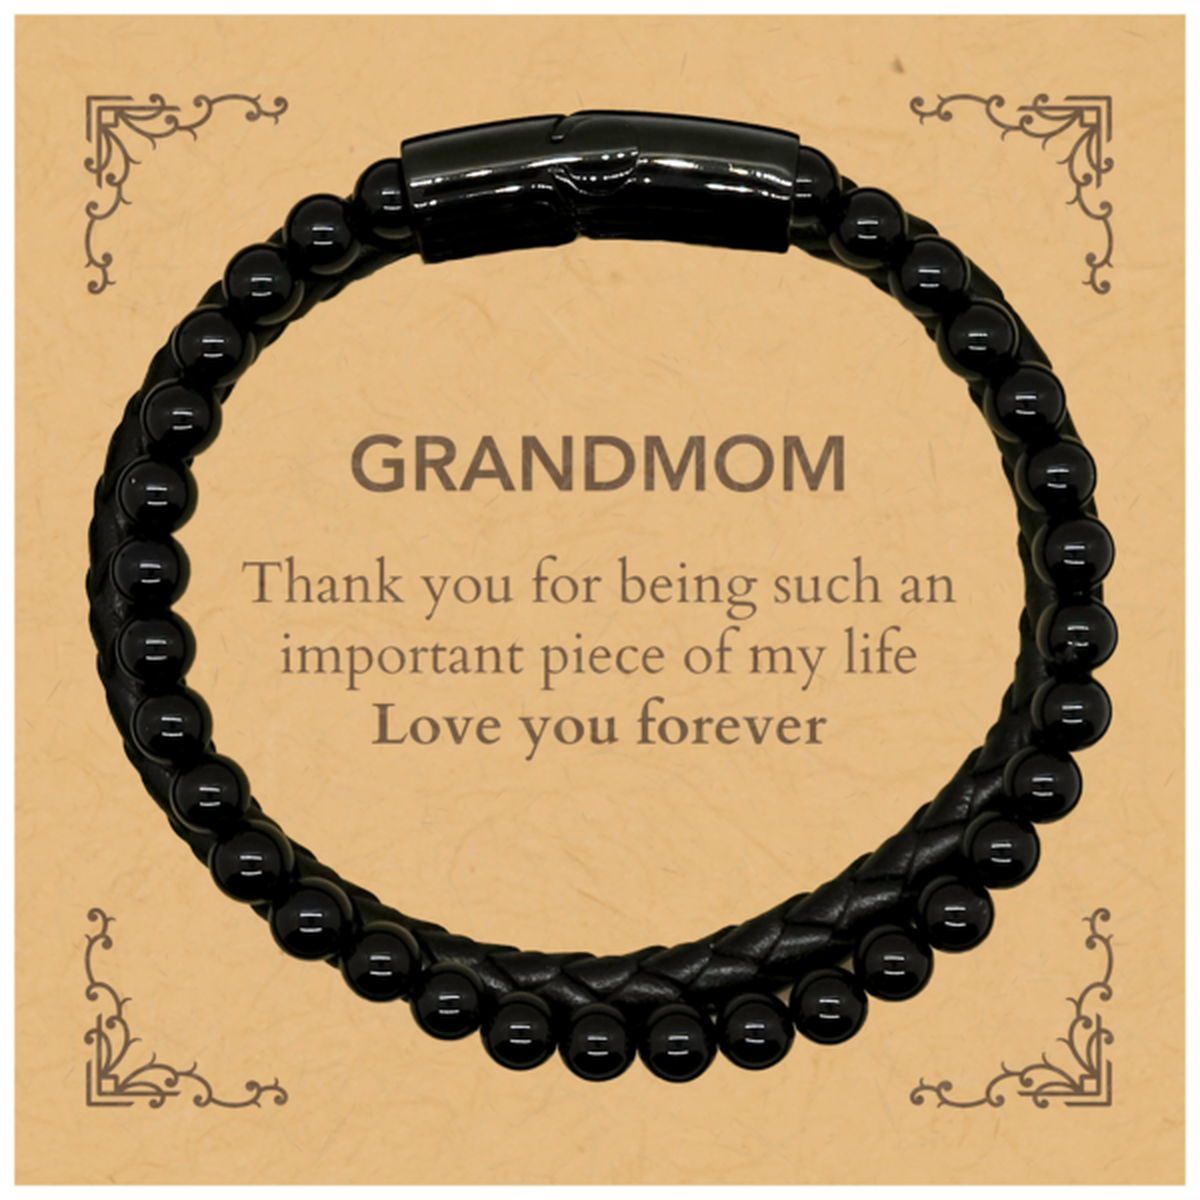 Appropriate Grandmom Stone Leather Bracelets Epic Birthday Gifts for Grandmom Thank you for being such an important piece of my life Grandmom Christmas Mothers Fathers Day